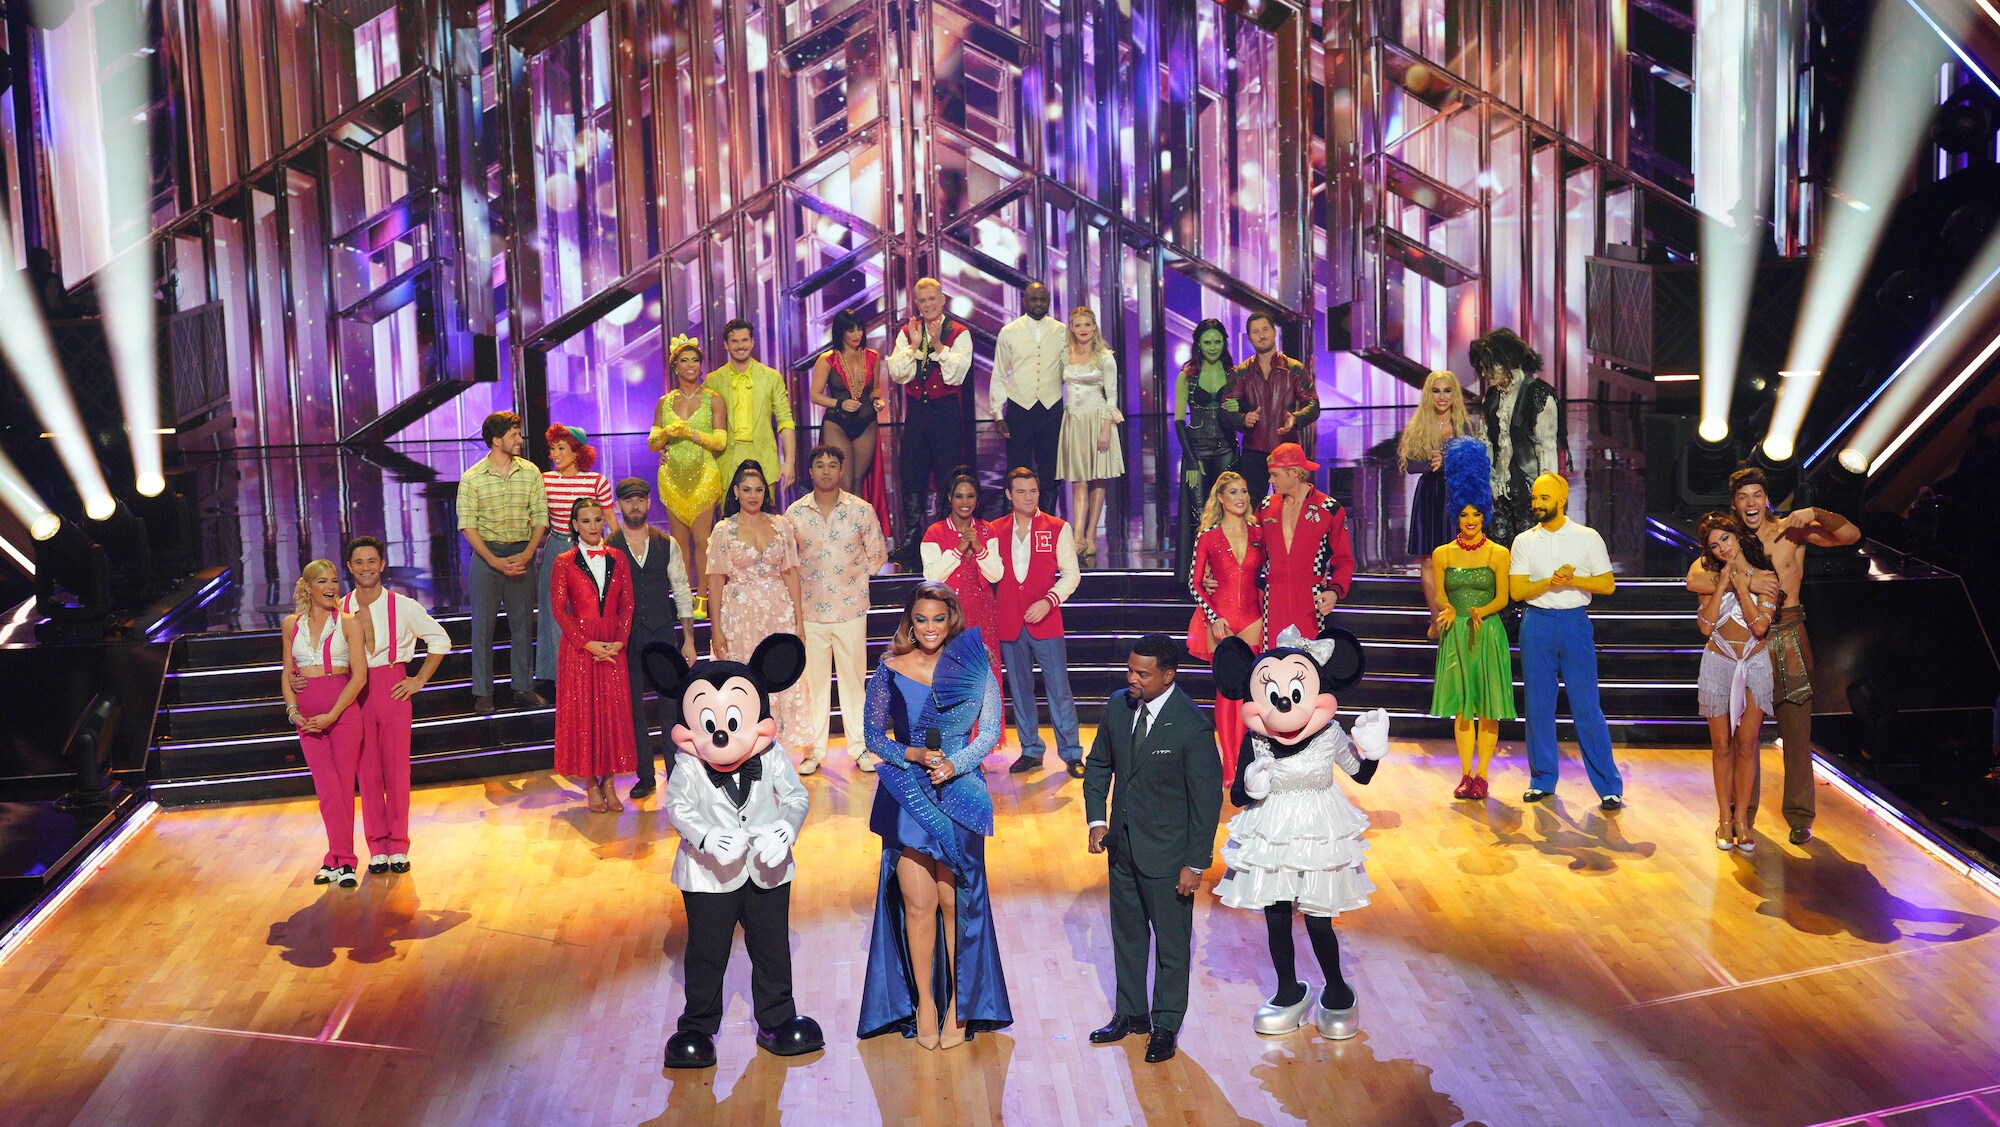 DANCING WITH THE STARS - “Disney+ Night” – The 13 remaining couples immerse themselves in the magic of Disney, Pixar, Marvel and more for an unforgettable “Disney+ Night” full of dazzling performances. Week four of the mirrorball competition will stream live MONDAY, OCT. 10 (8:00pm ET / 5:00pm PT), on Disney+. (ABC/Christopher Willard) DANCING WITH THE STARS